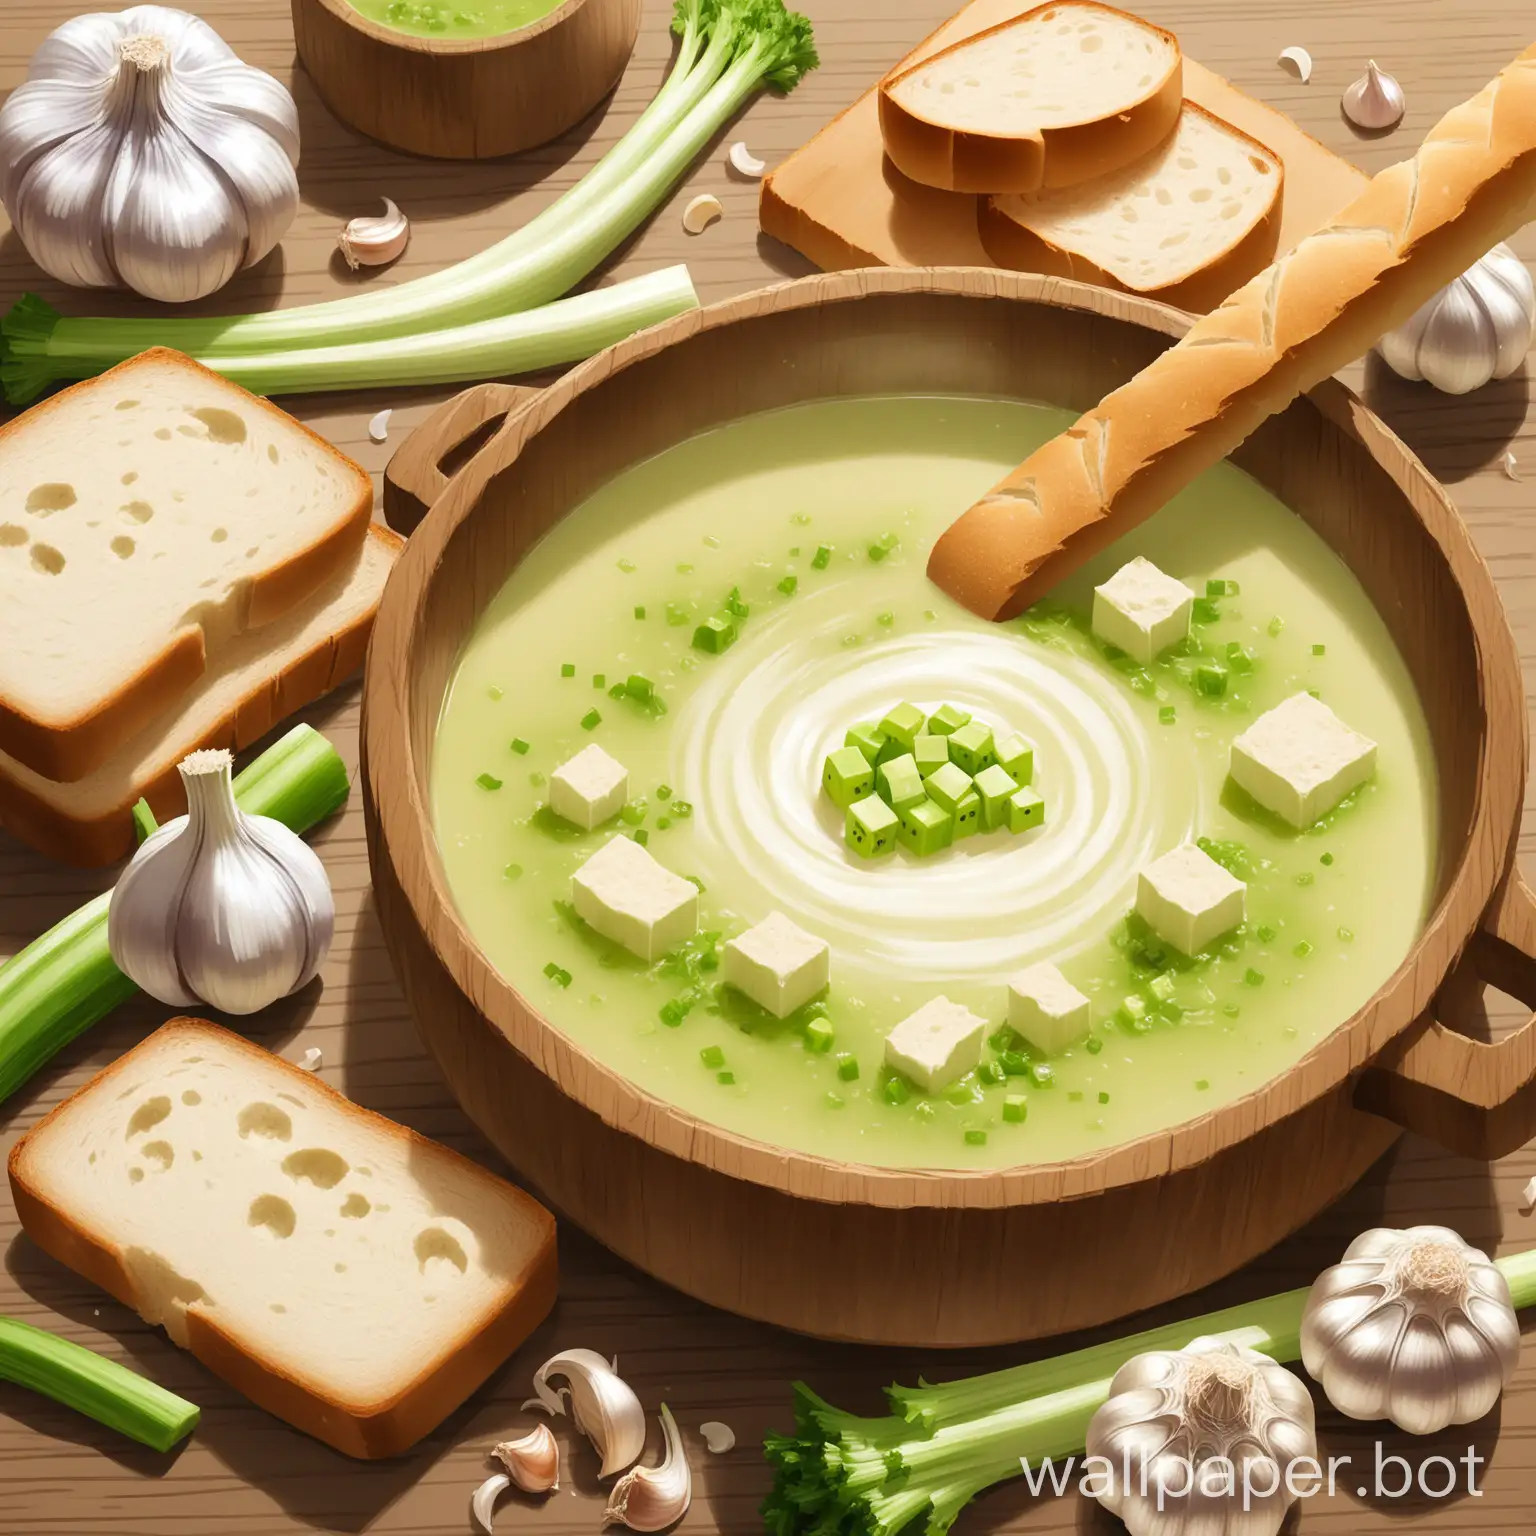 wooden places for the soup,made soup with cream of celery,made a piece of baking bread to dice in the soup,and a piece of baking bread next to the garlic, detail picture